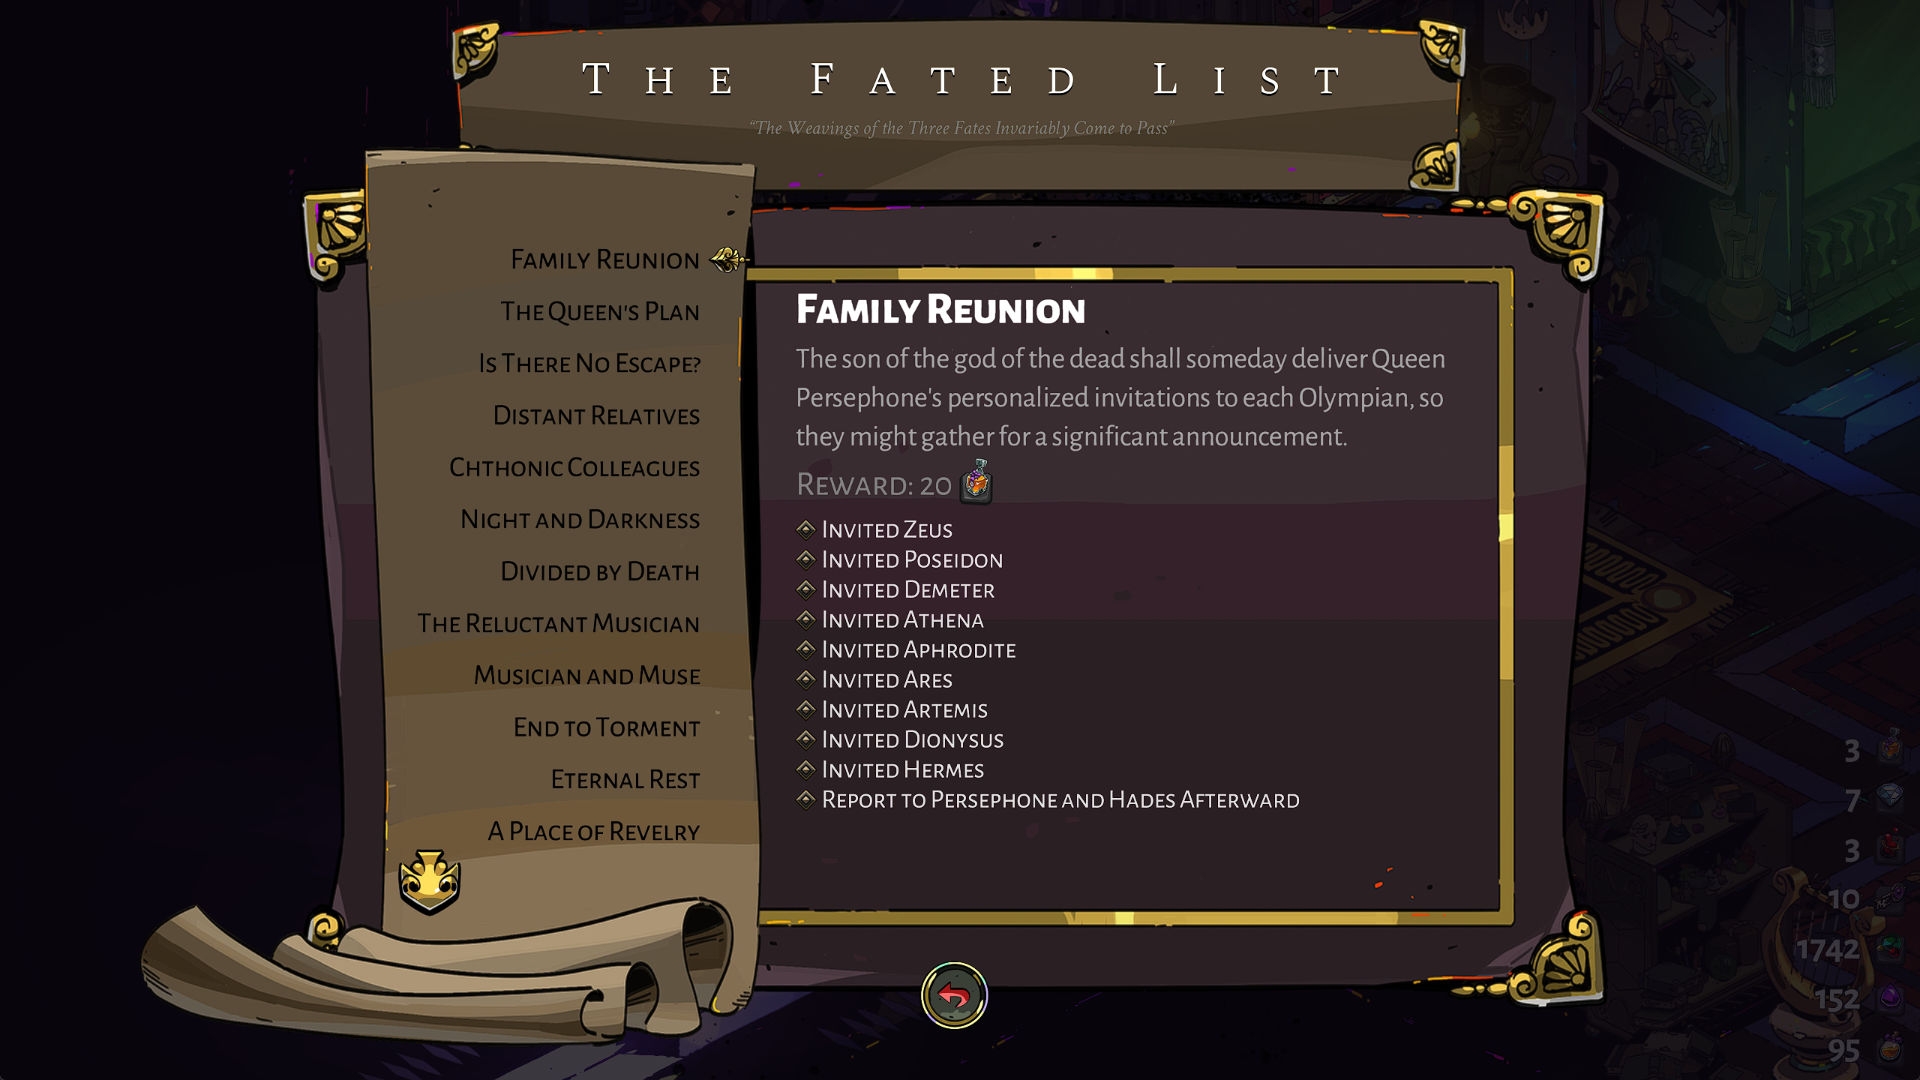 The Fated List of Minor Prophecies